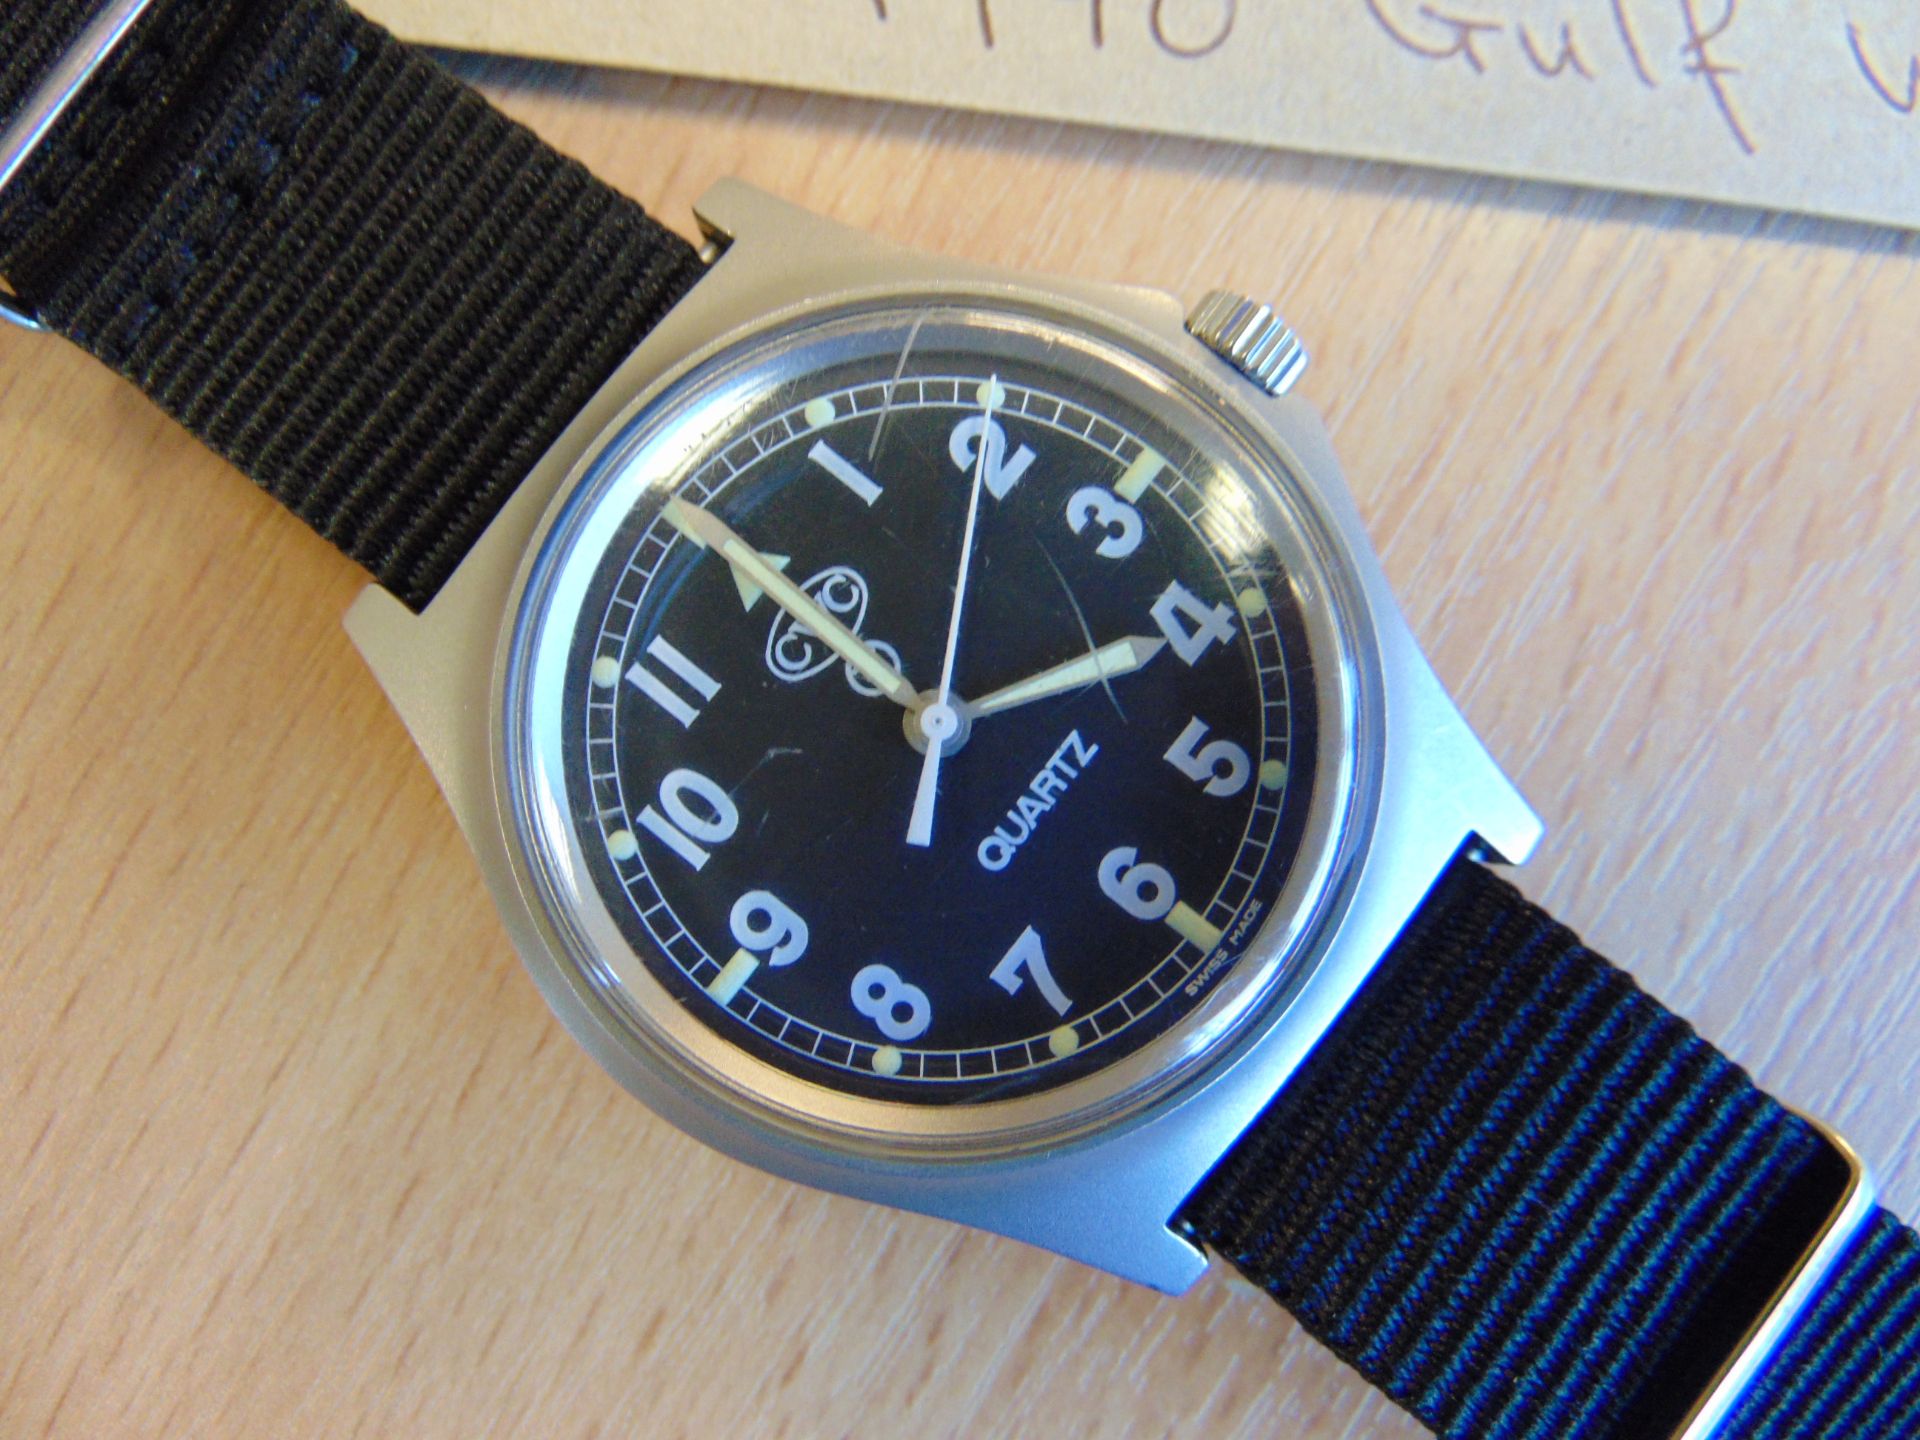 Very Rare Unissued 0552 Royal Marines Navy Issue CWC W10 Service Watch Nato Markings - Image 2 of 8